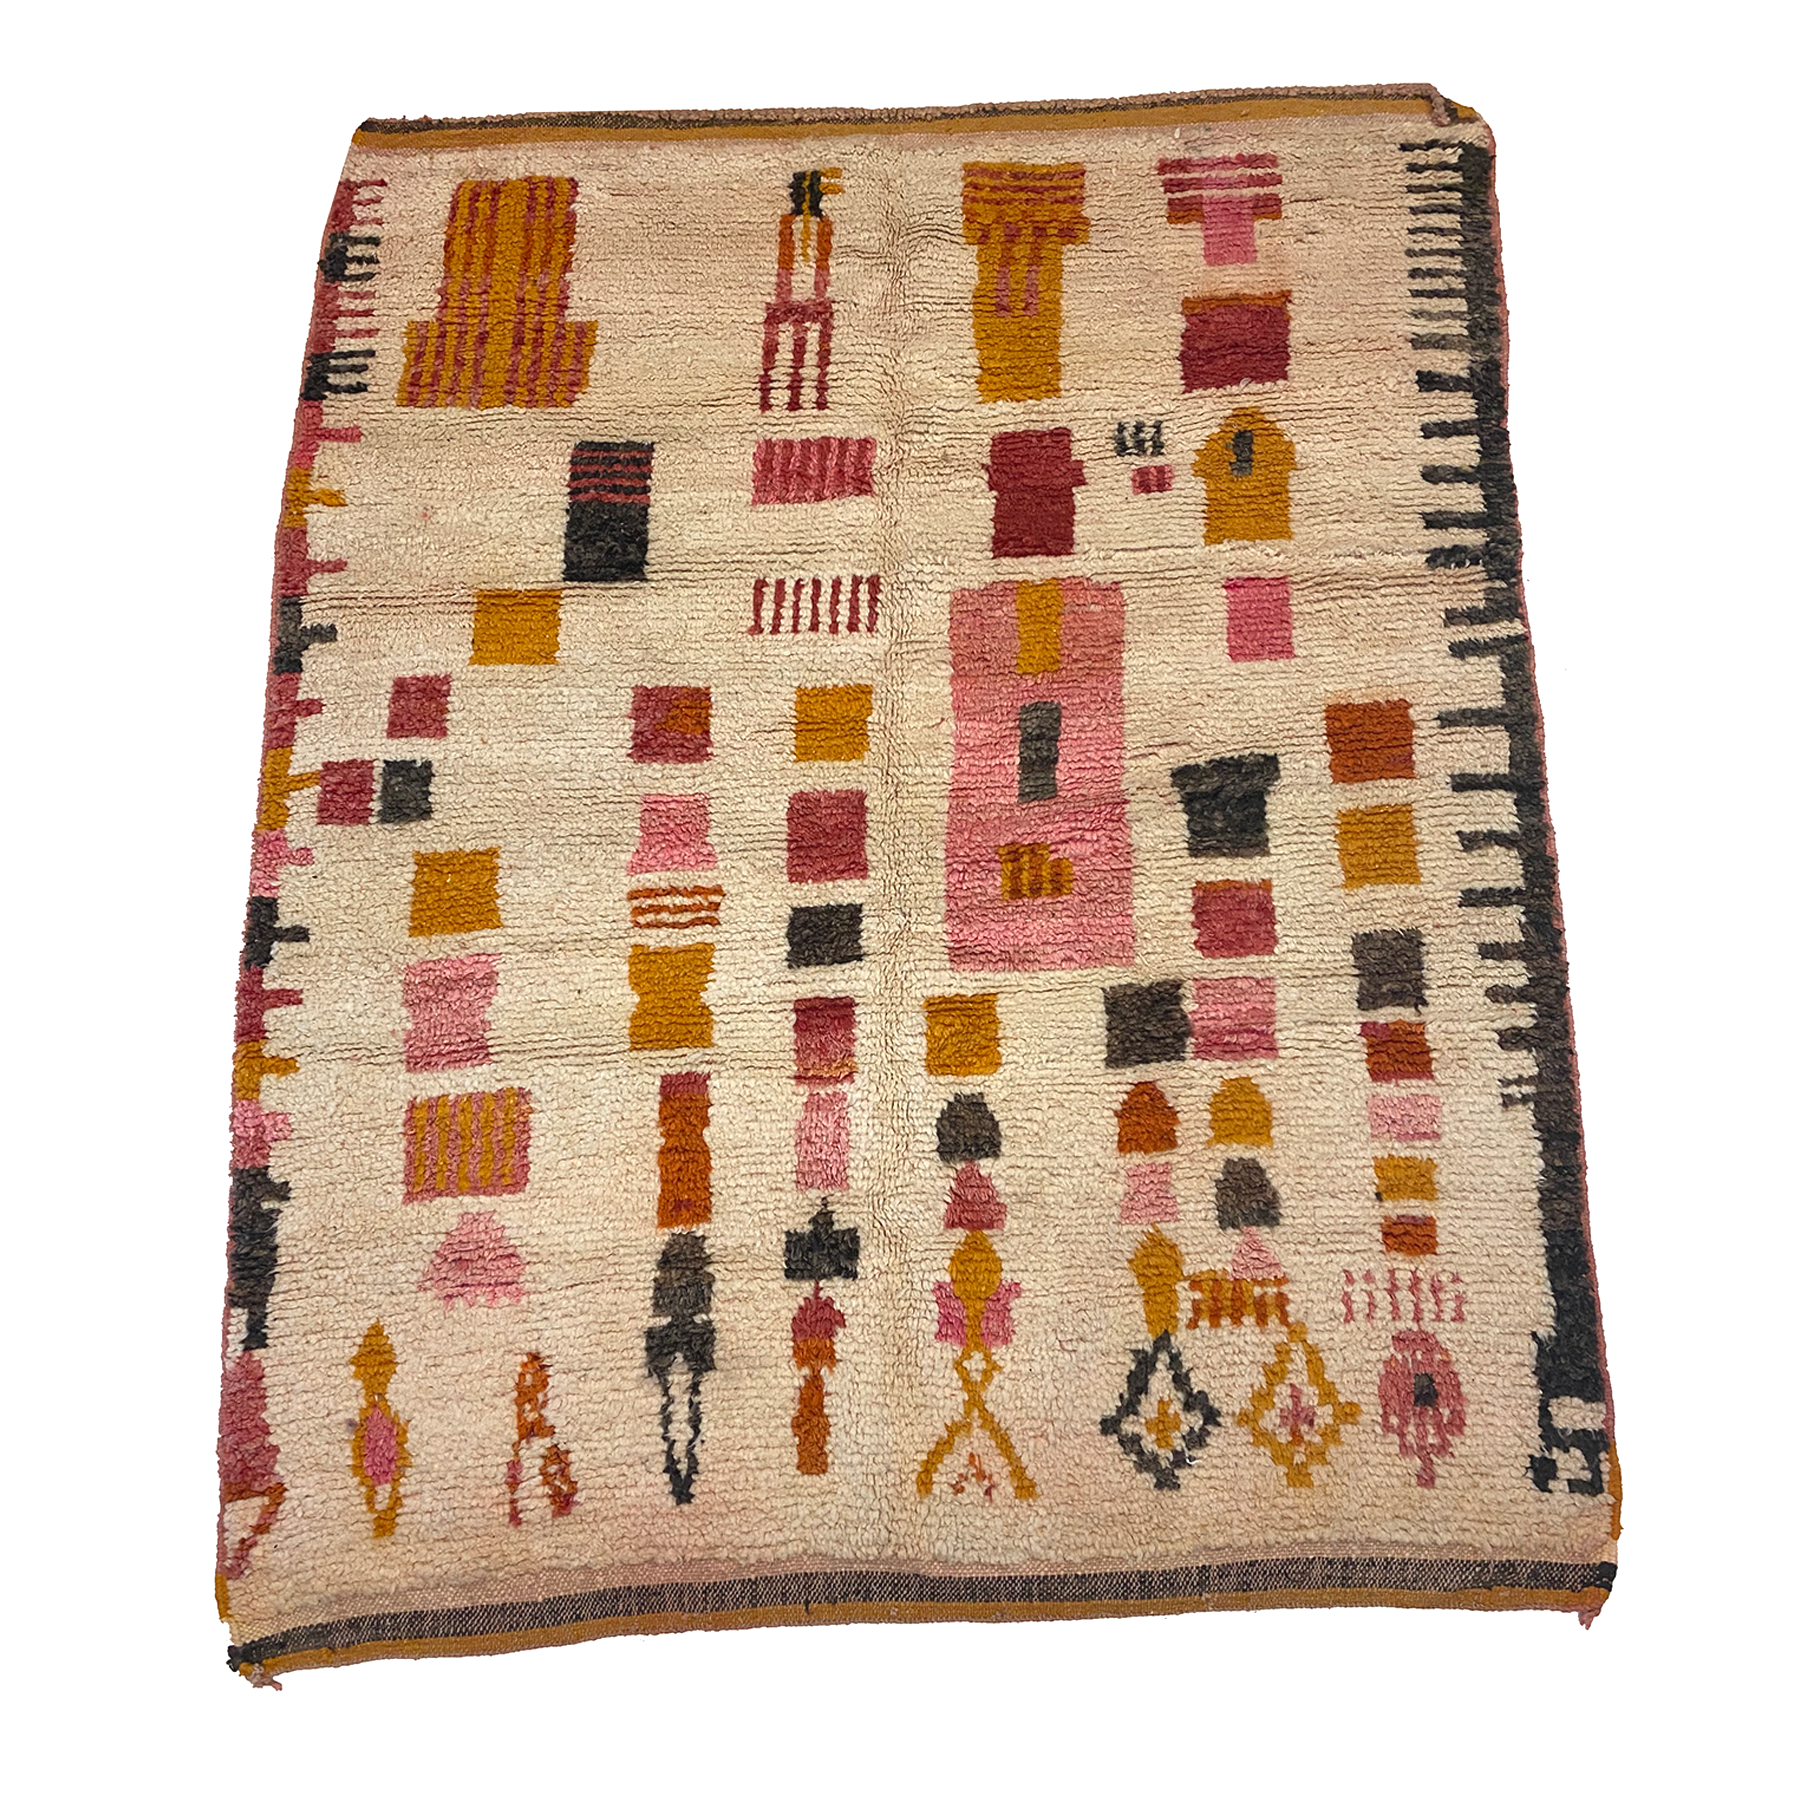 Pink and mustard yellow Moroccan rug with colored box design on cream background